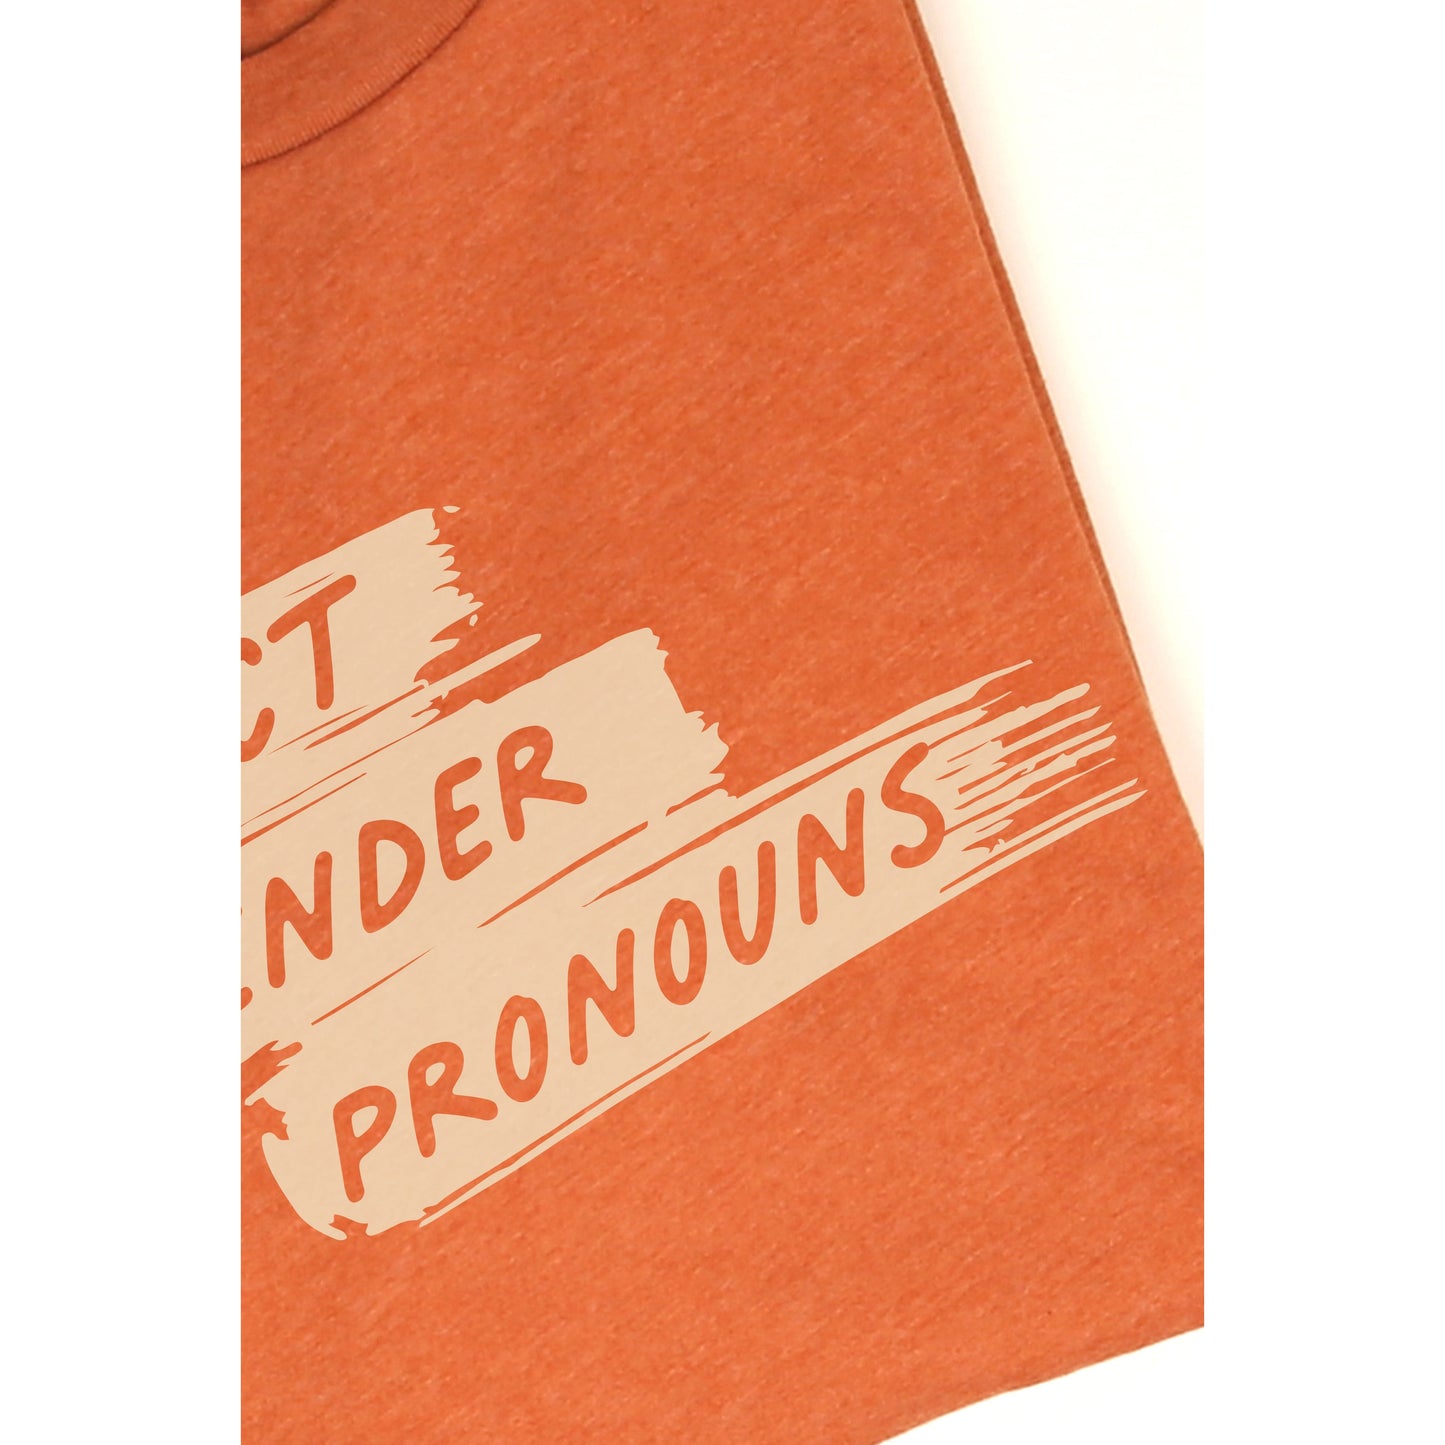 Respect Gender Pronouns - thread tank | Stories you can wear.